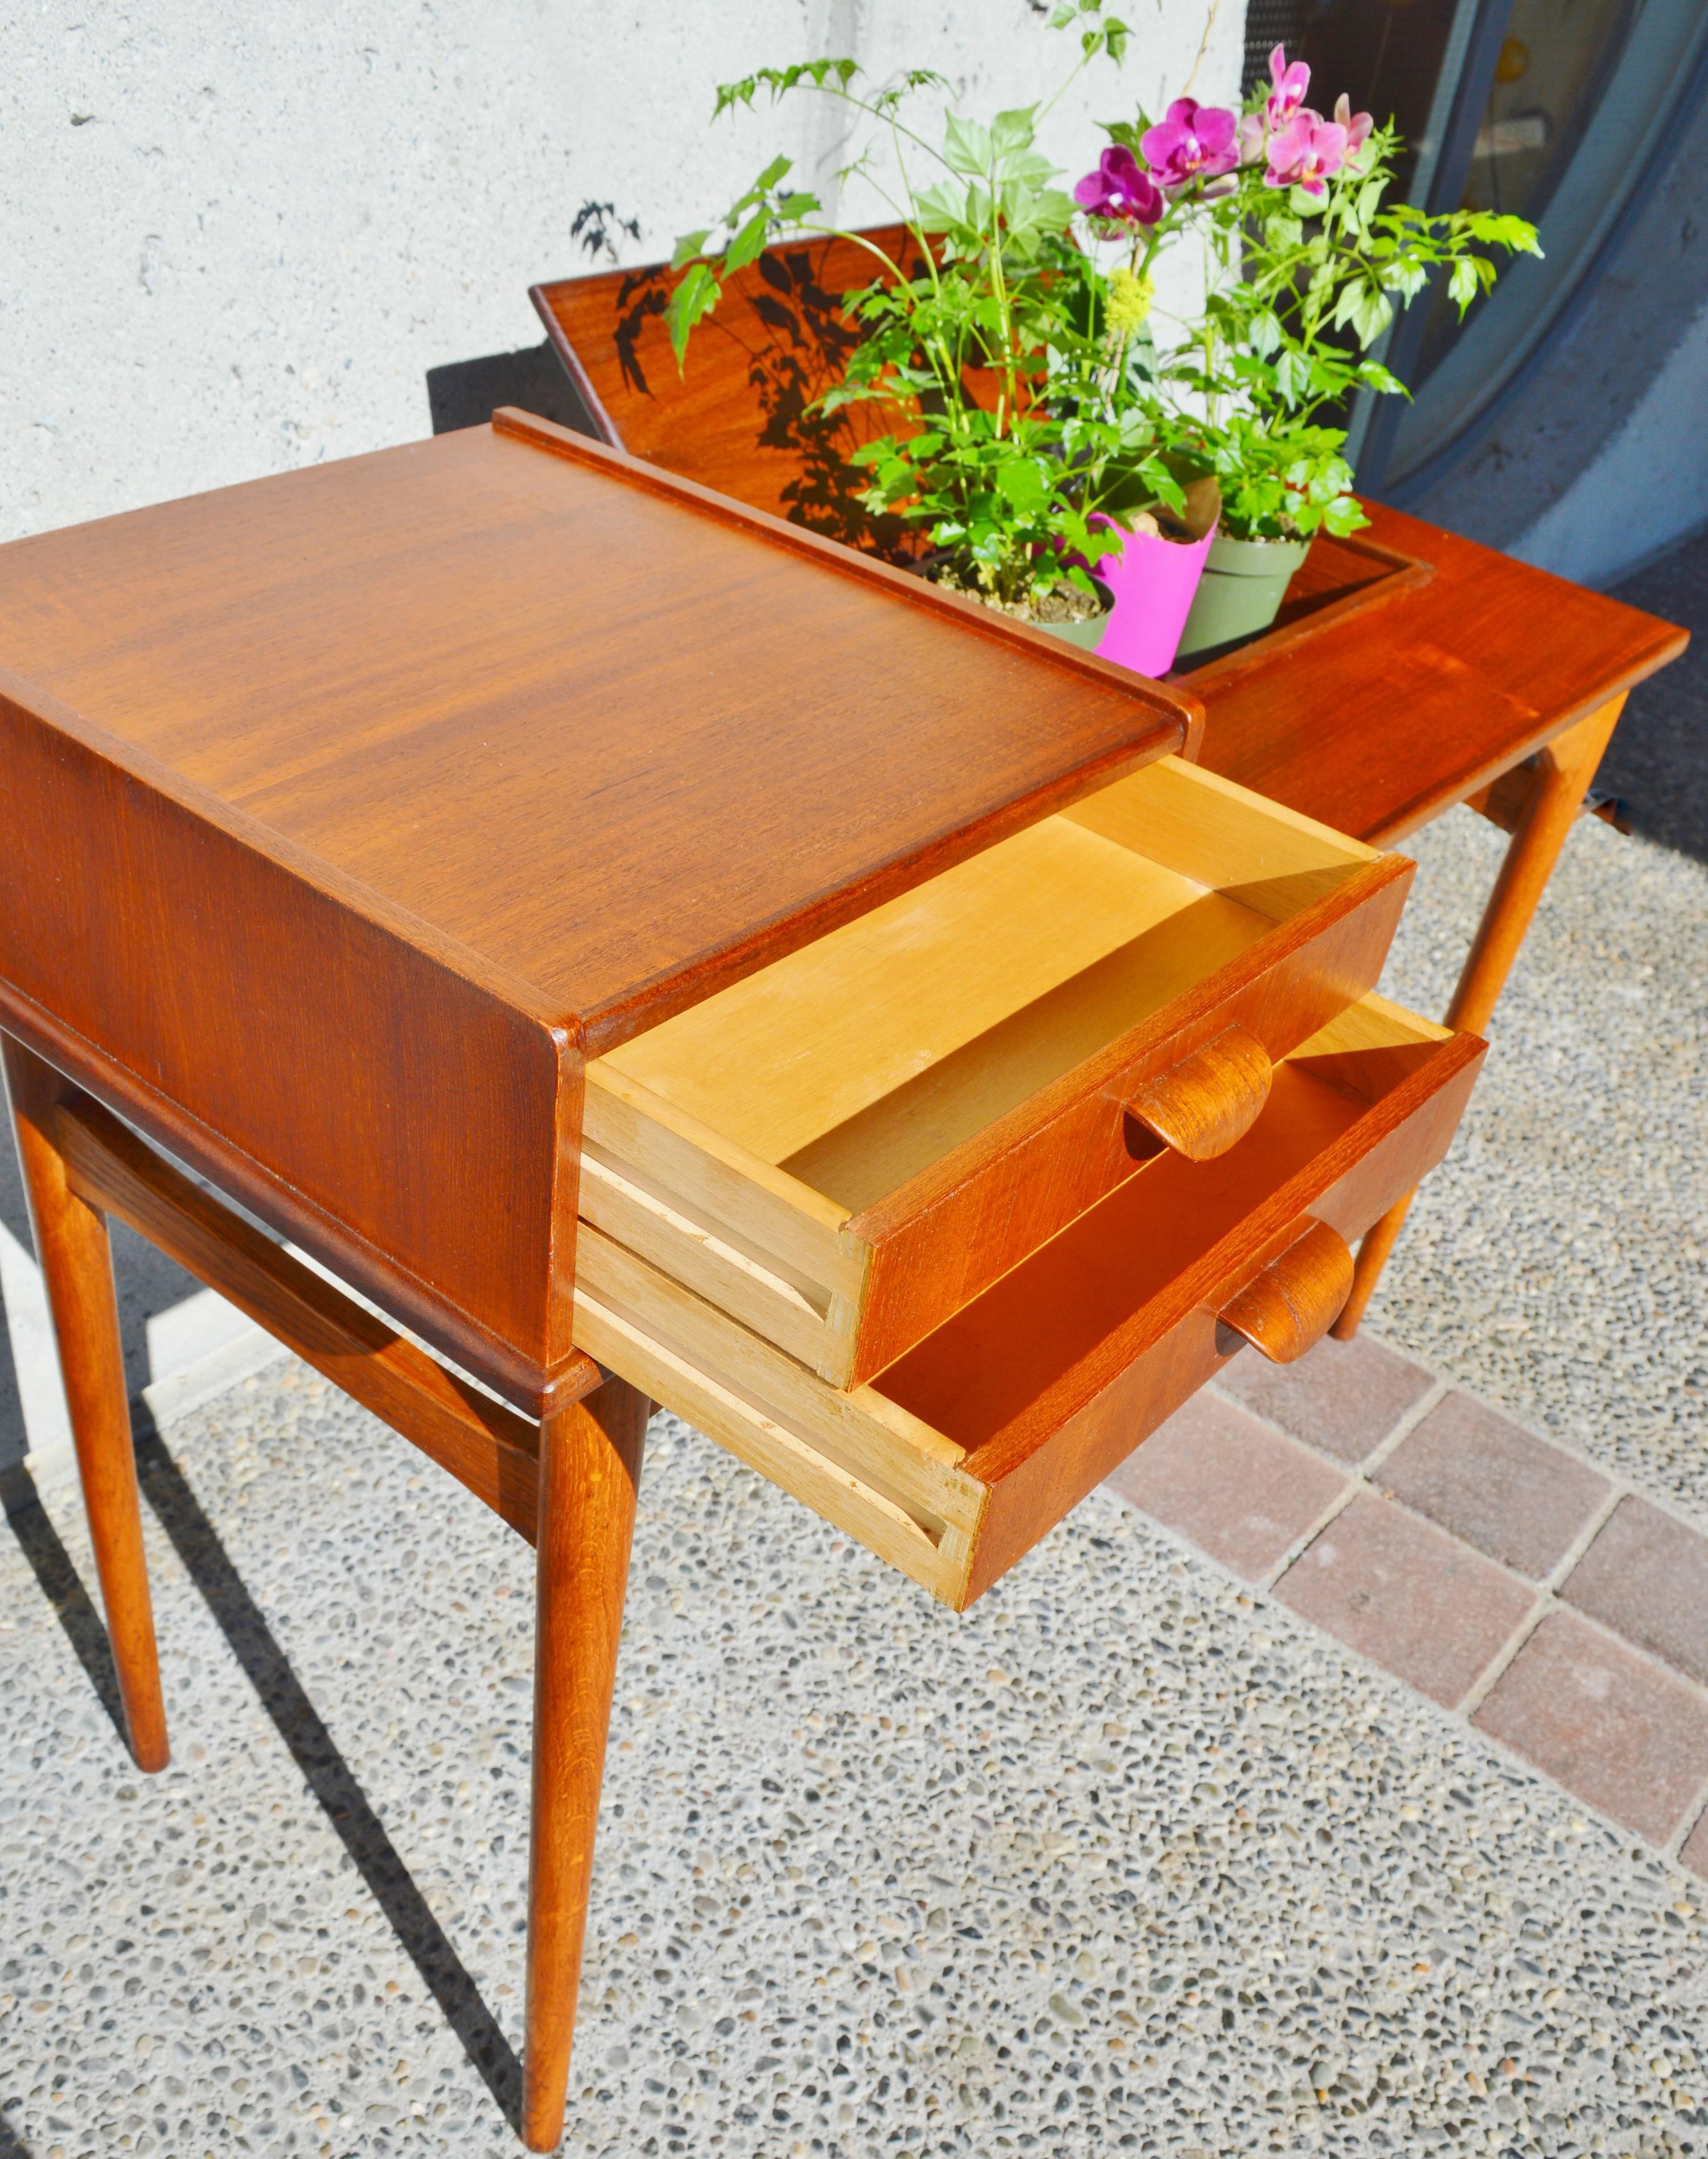 Mid-20th Century Danish Teak and Oak Sofa or Hall Table with Lift Top Storage or Planter